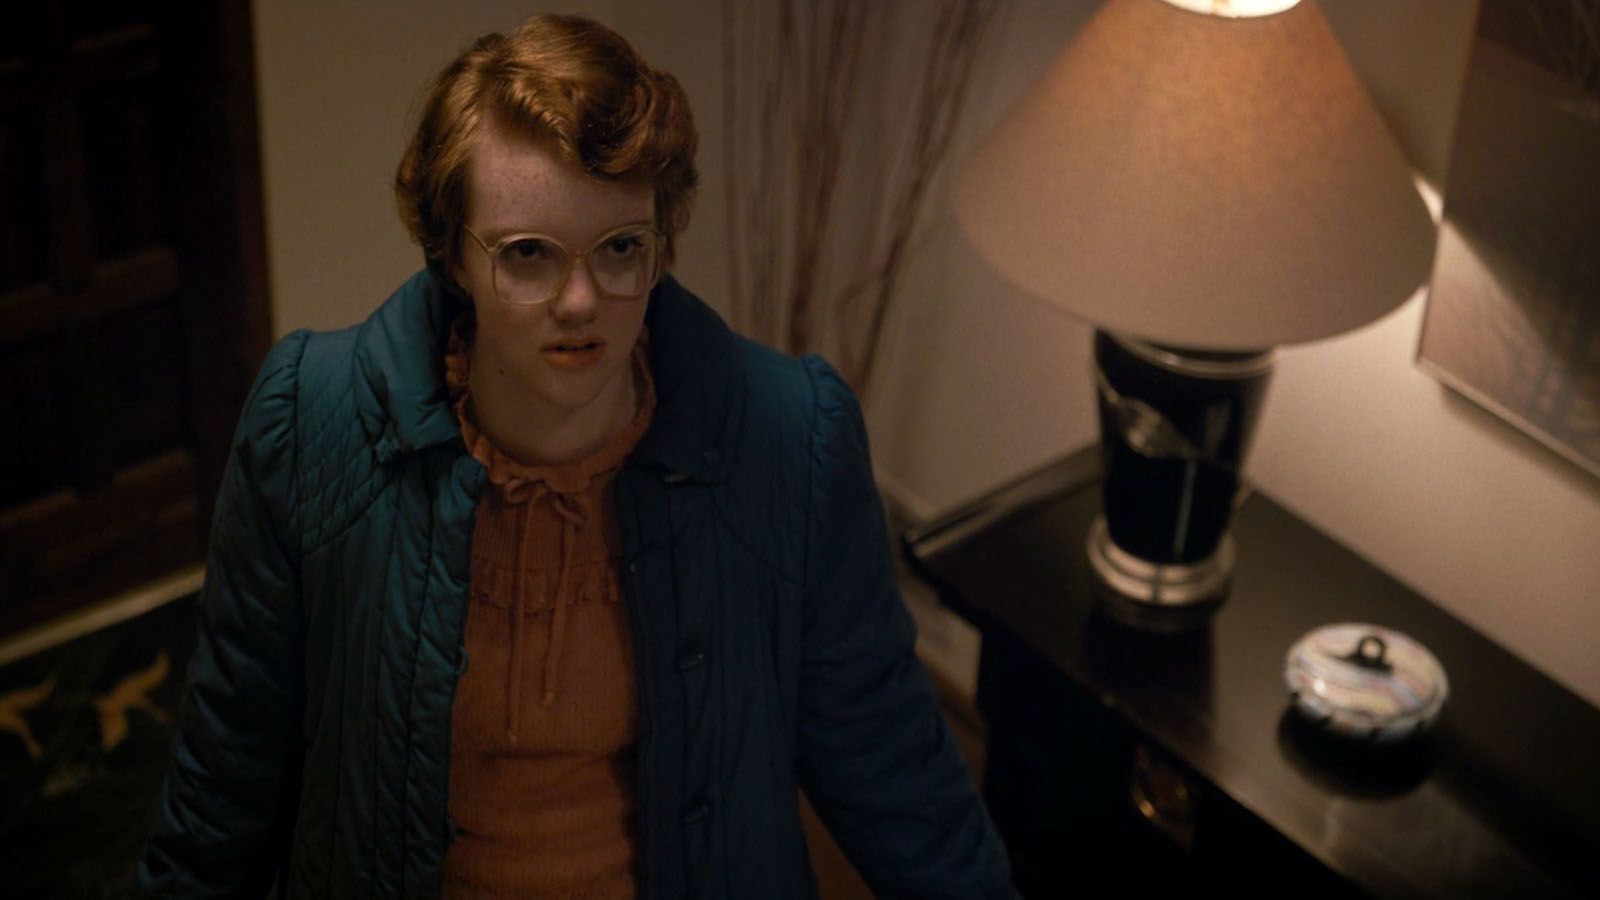 Will 'Stranger Things' season 2 have justice for Barb?